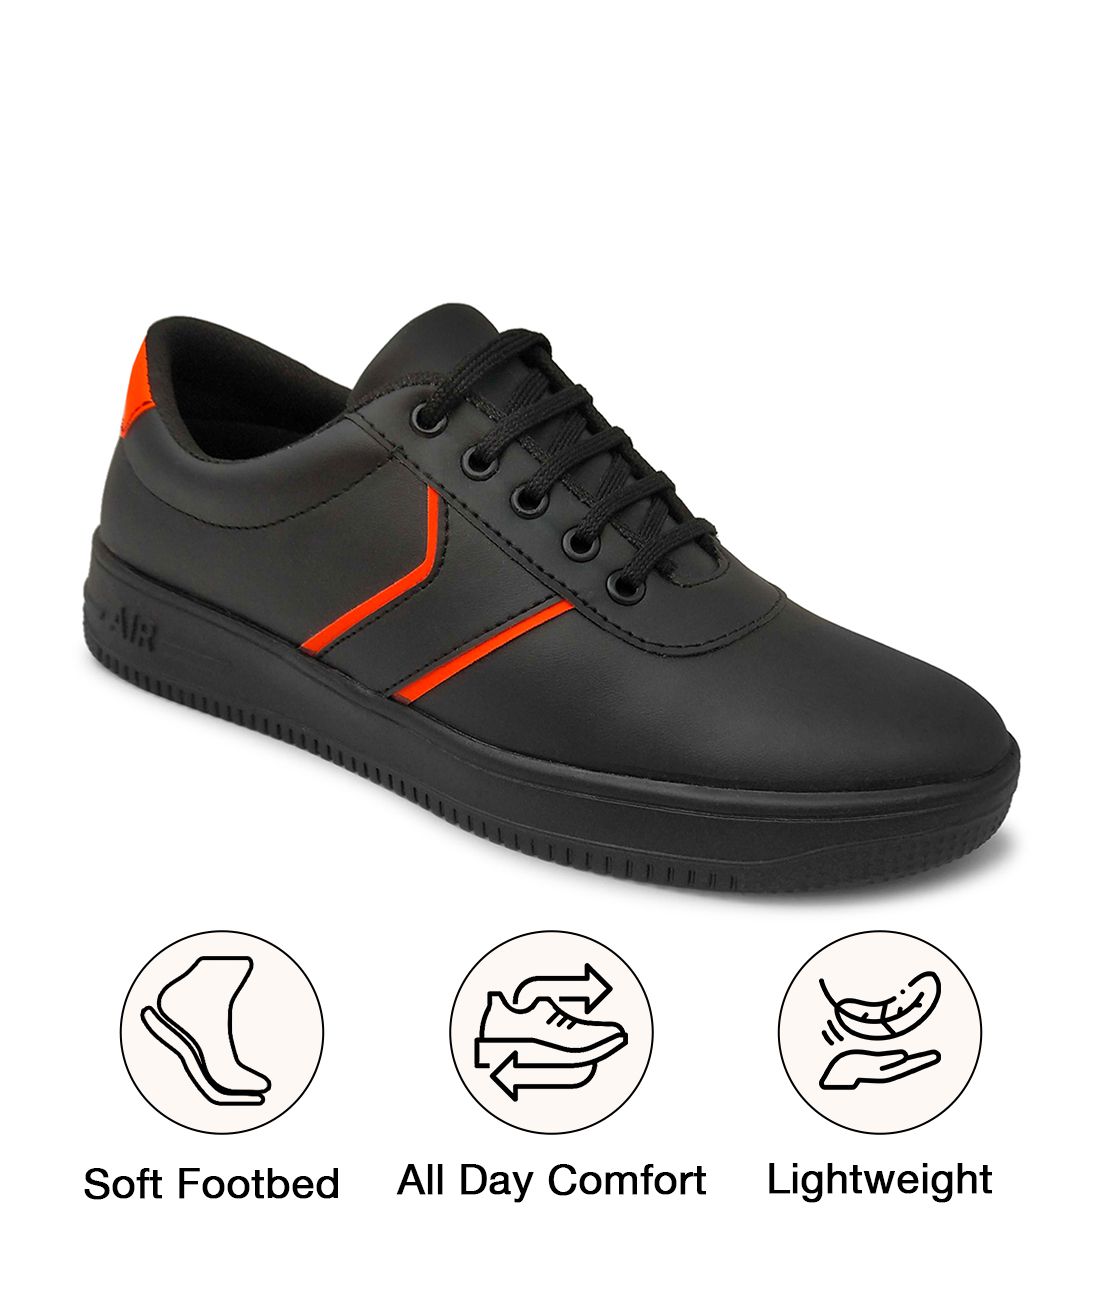     			UrbanMark Men Casual Striped Lace-Up Sneakers Shoes- Black